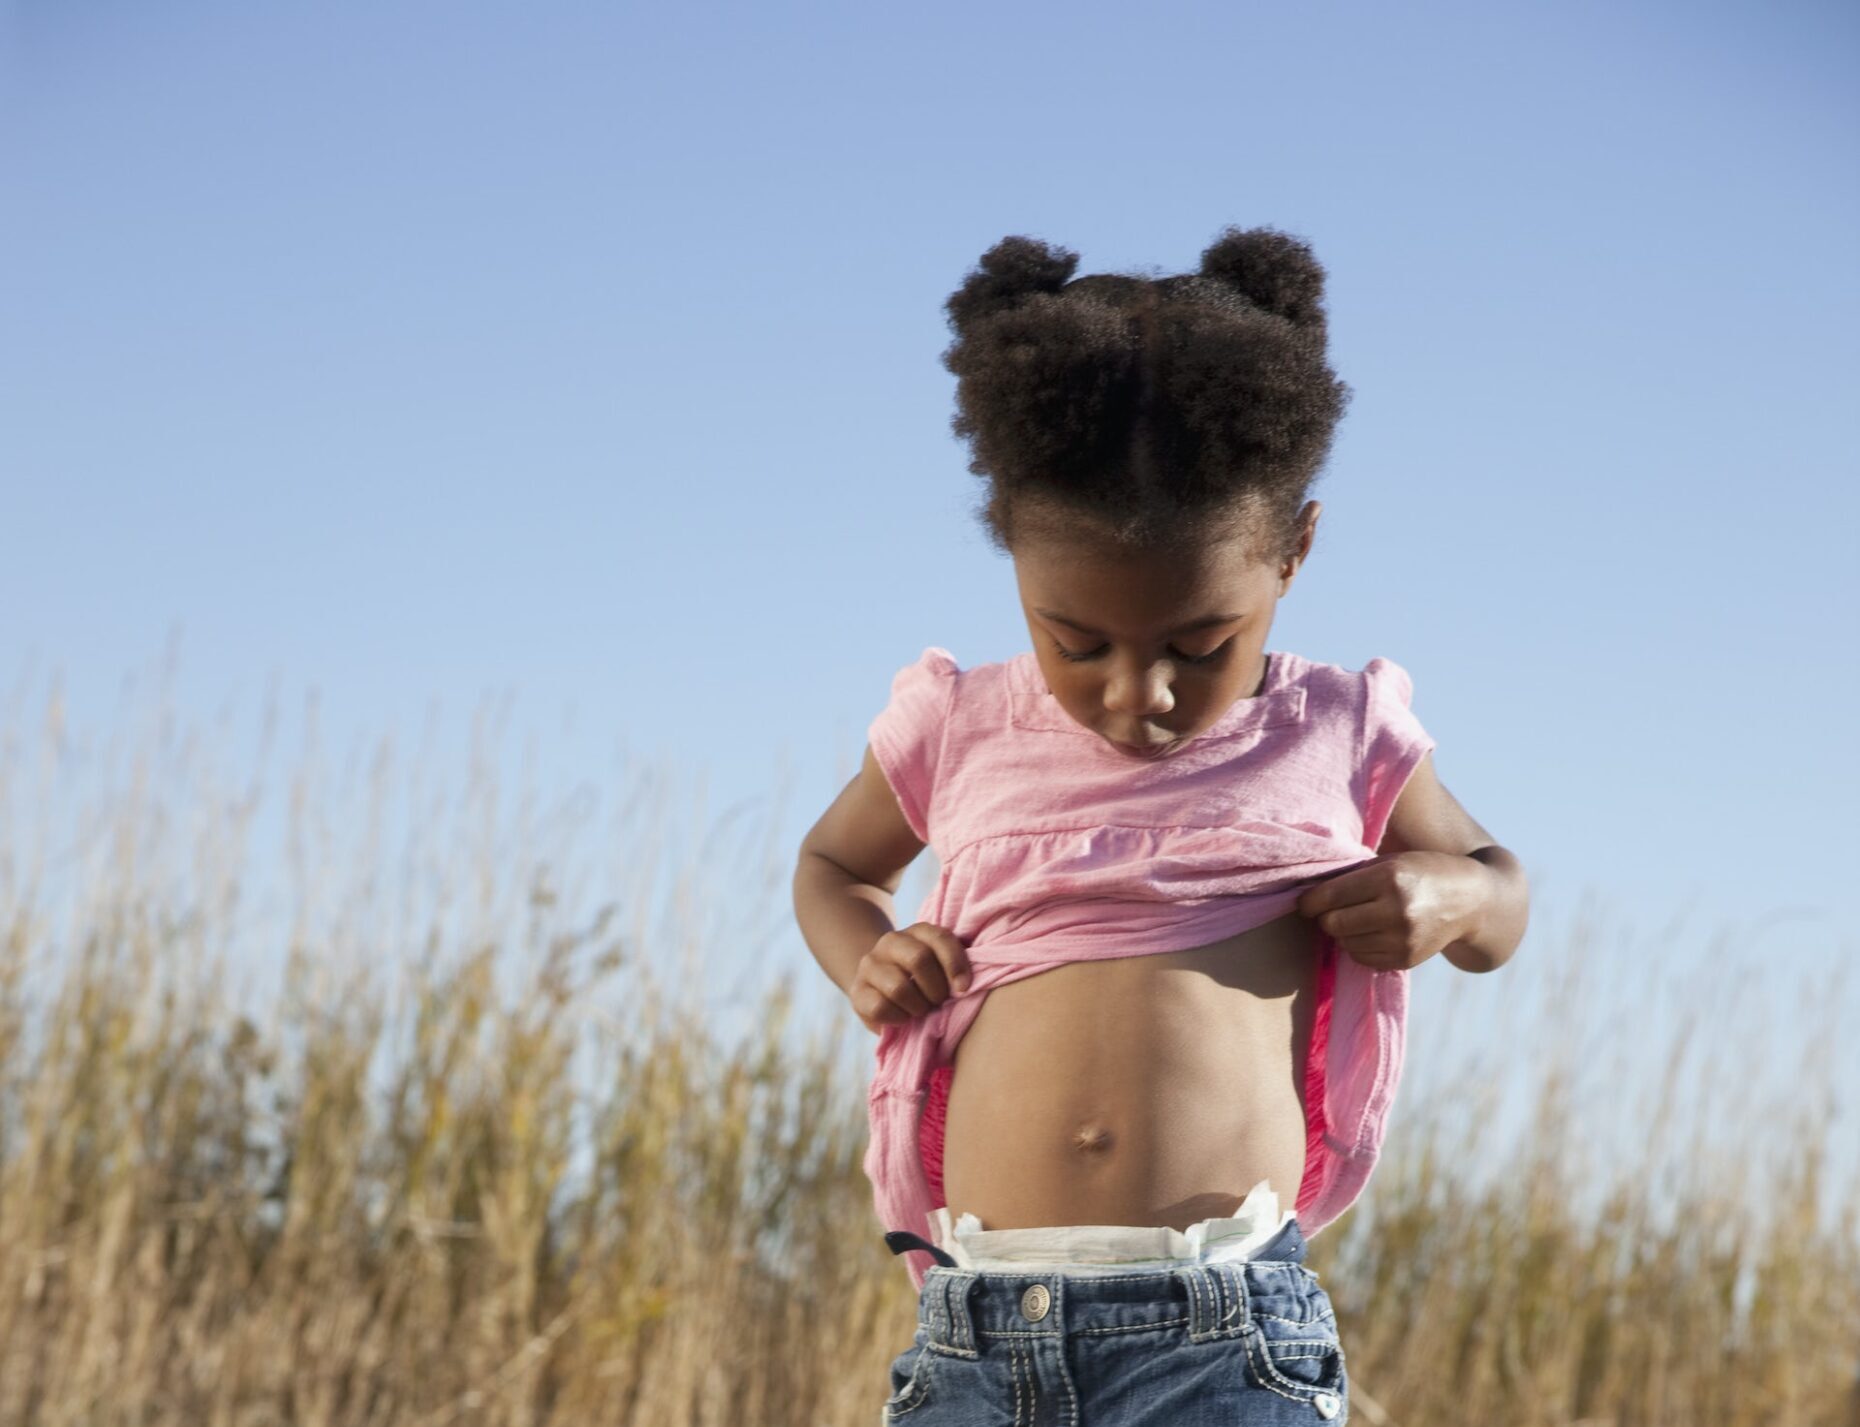 A little girl standing in a grassy field holds up her shirt to look at her belly button.